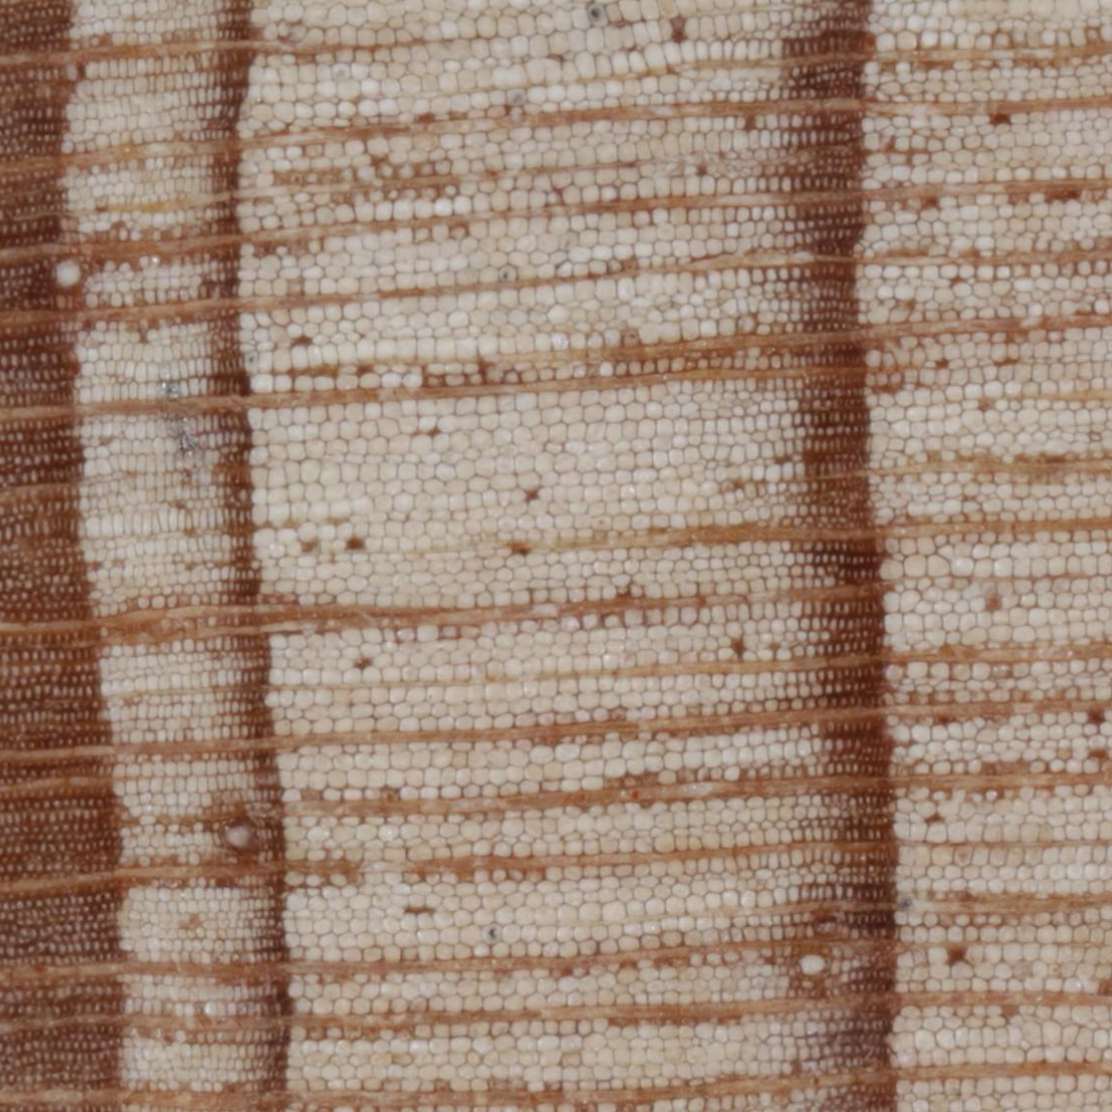 Magnified image of tree rings showing individual cells.